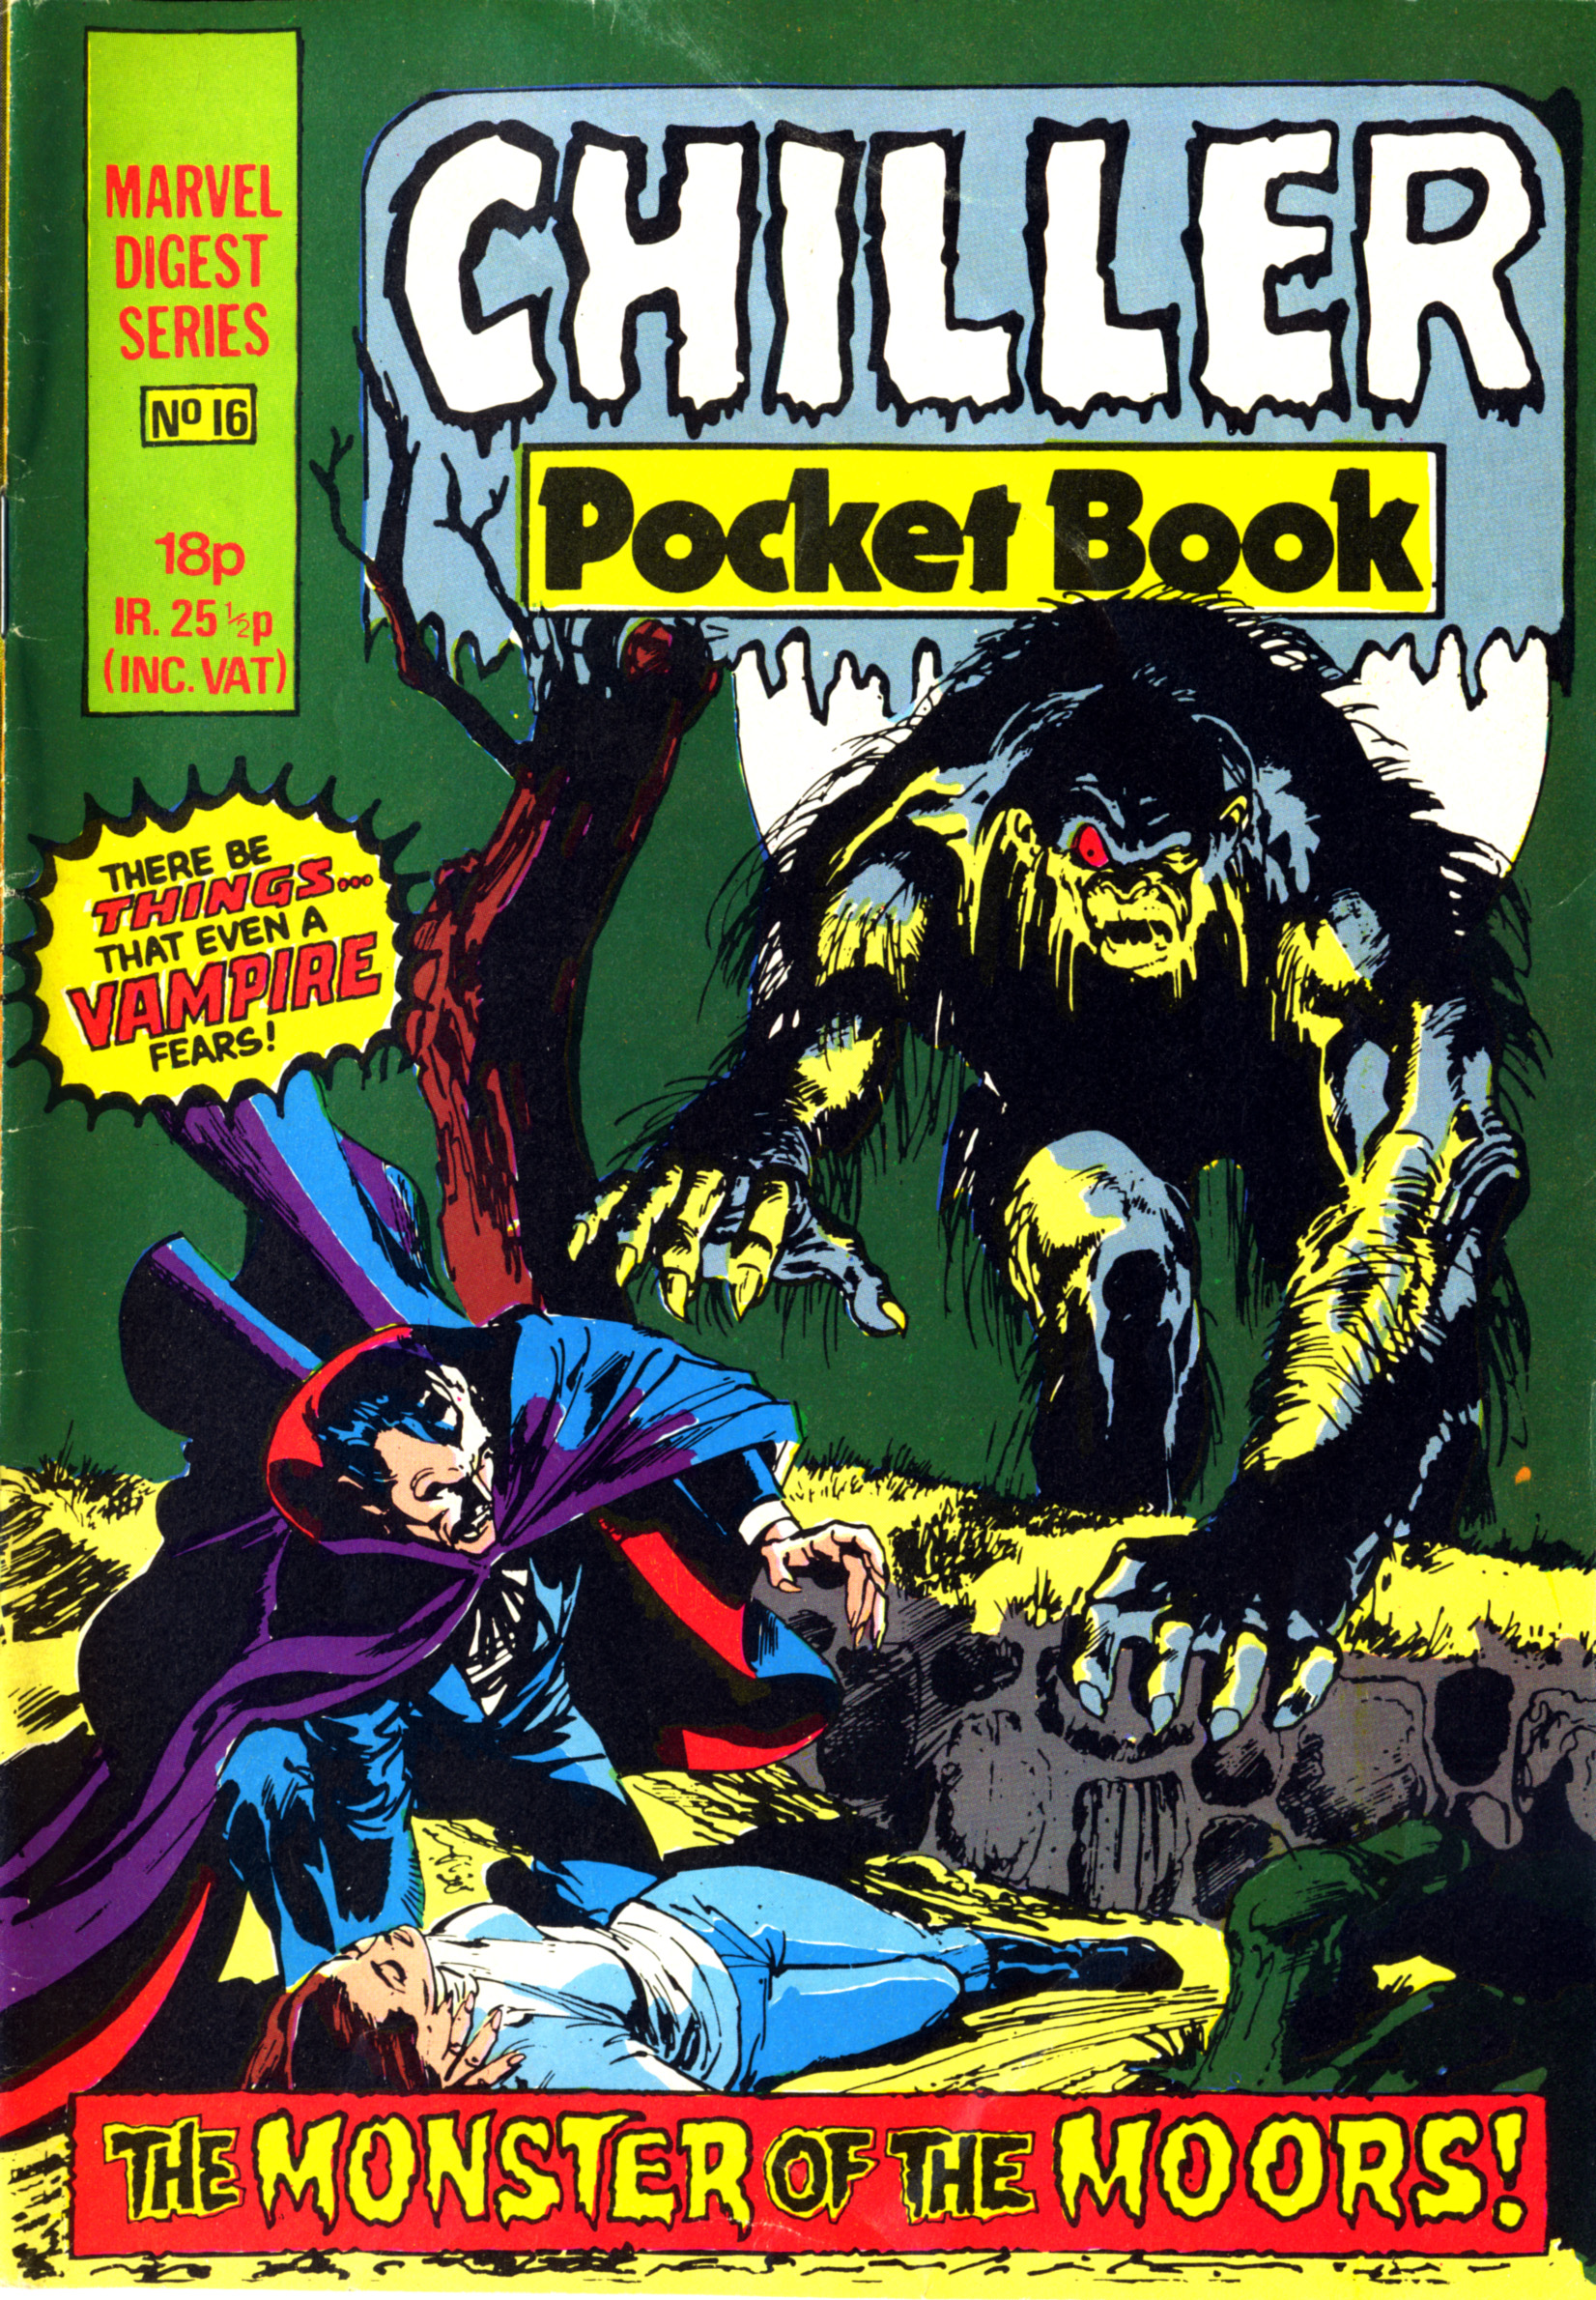 Read online Chiller Pocket Book comic -  Issue #16 - 1